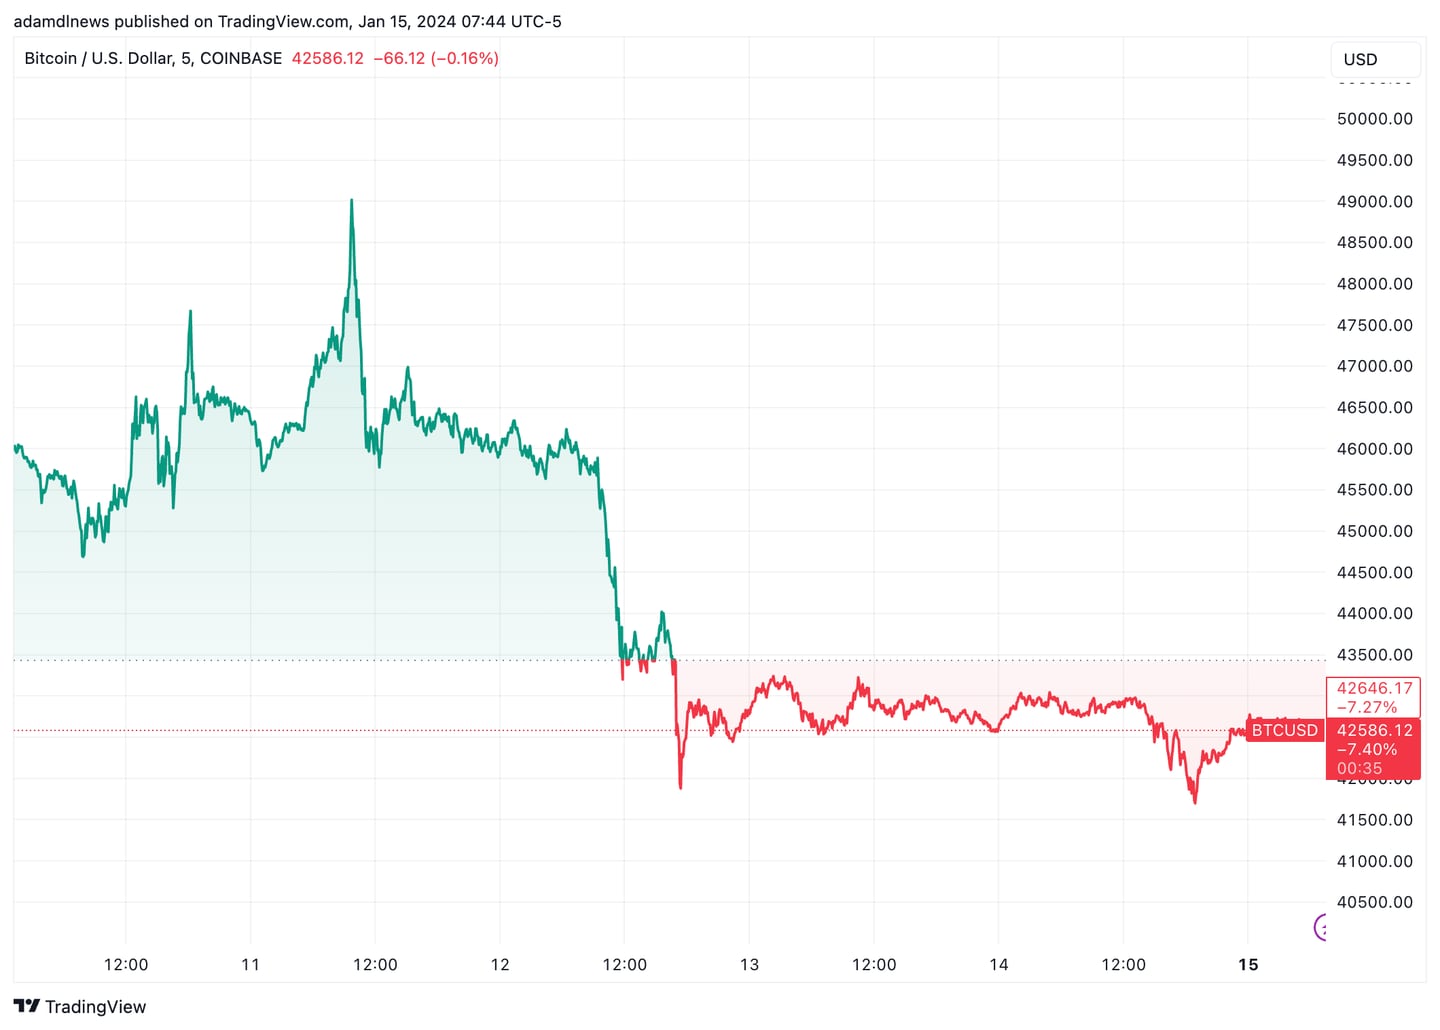 Bitcoin's price slid following the launch of spot ETFs in the US.